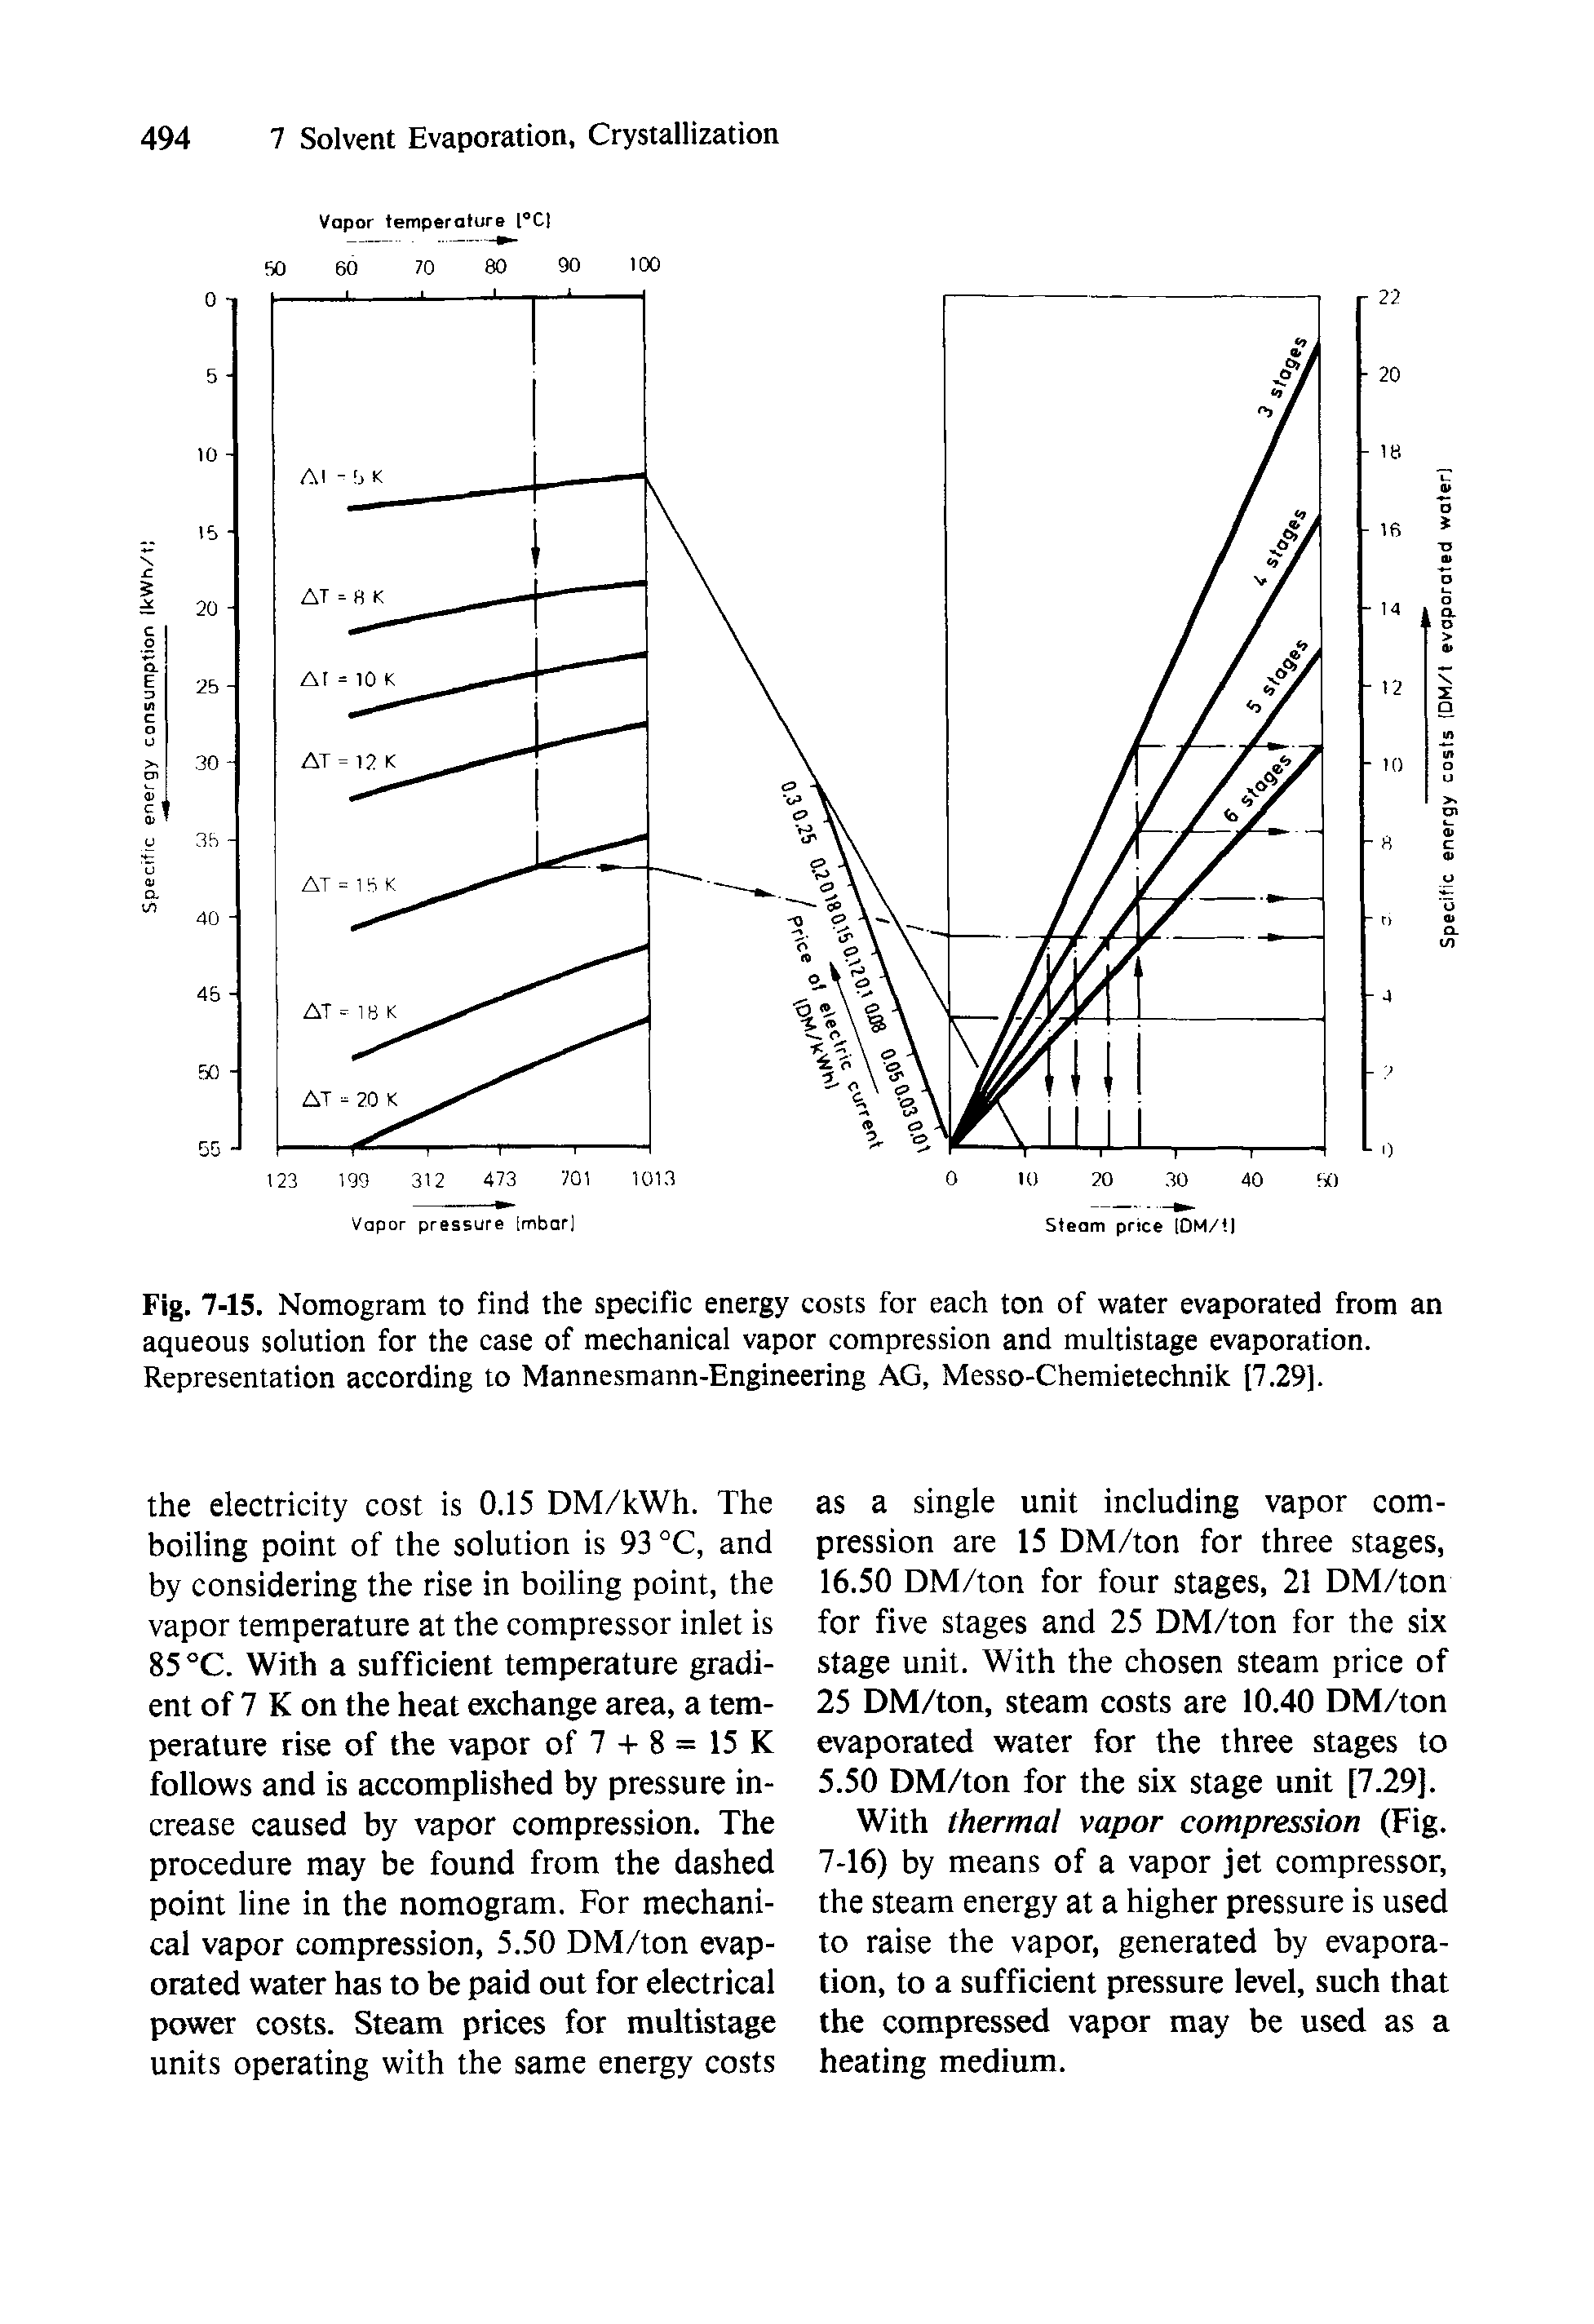 Fig. 7-15. Nomogram to find the specific energy costs for each ton of water evaporated from an aqueous solution for the case of mechanical vapor compression and multistage evaporation. Representation according to Mannesmann-Engineering AG, Messo-Chemietechnik [7.29].